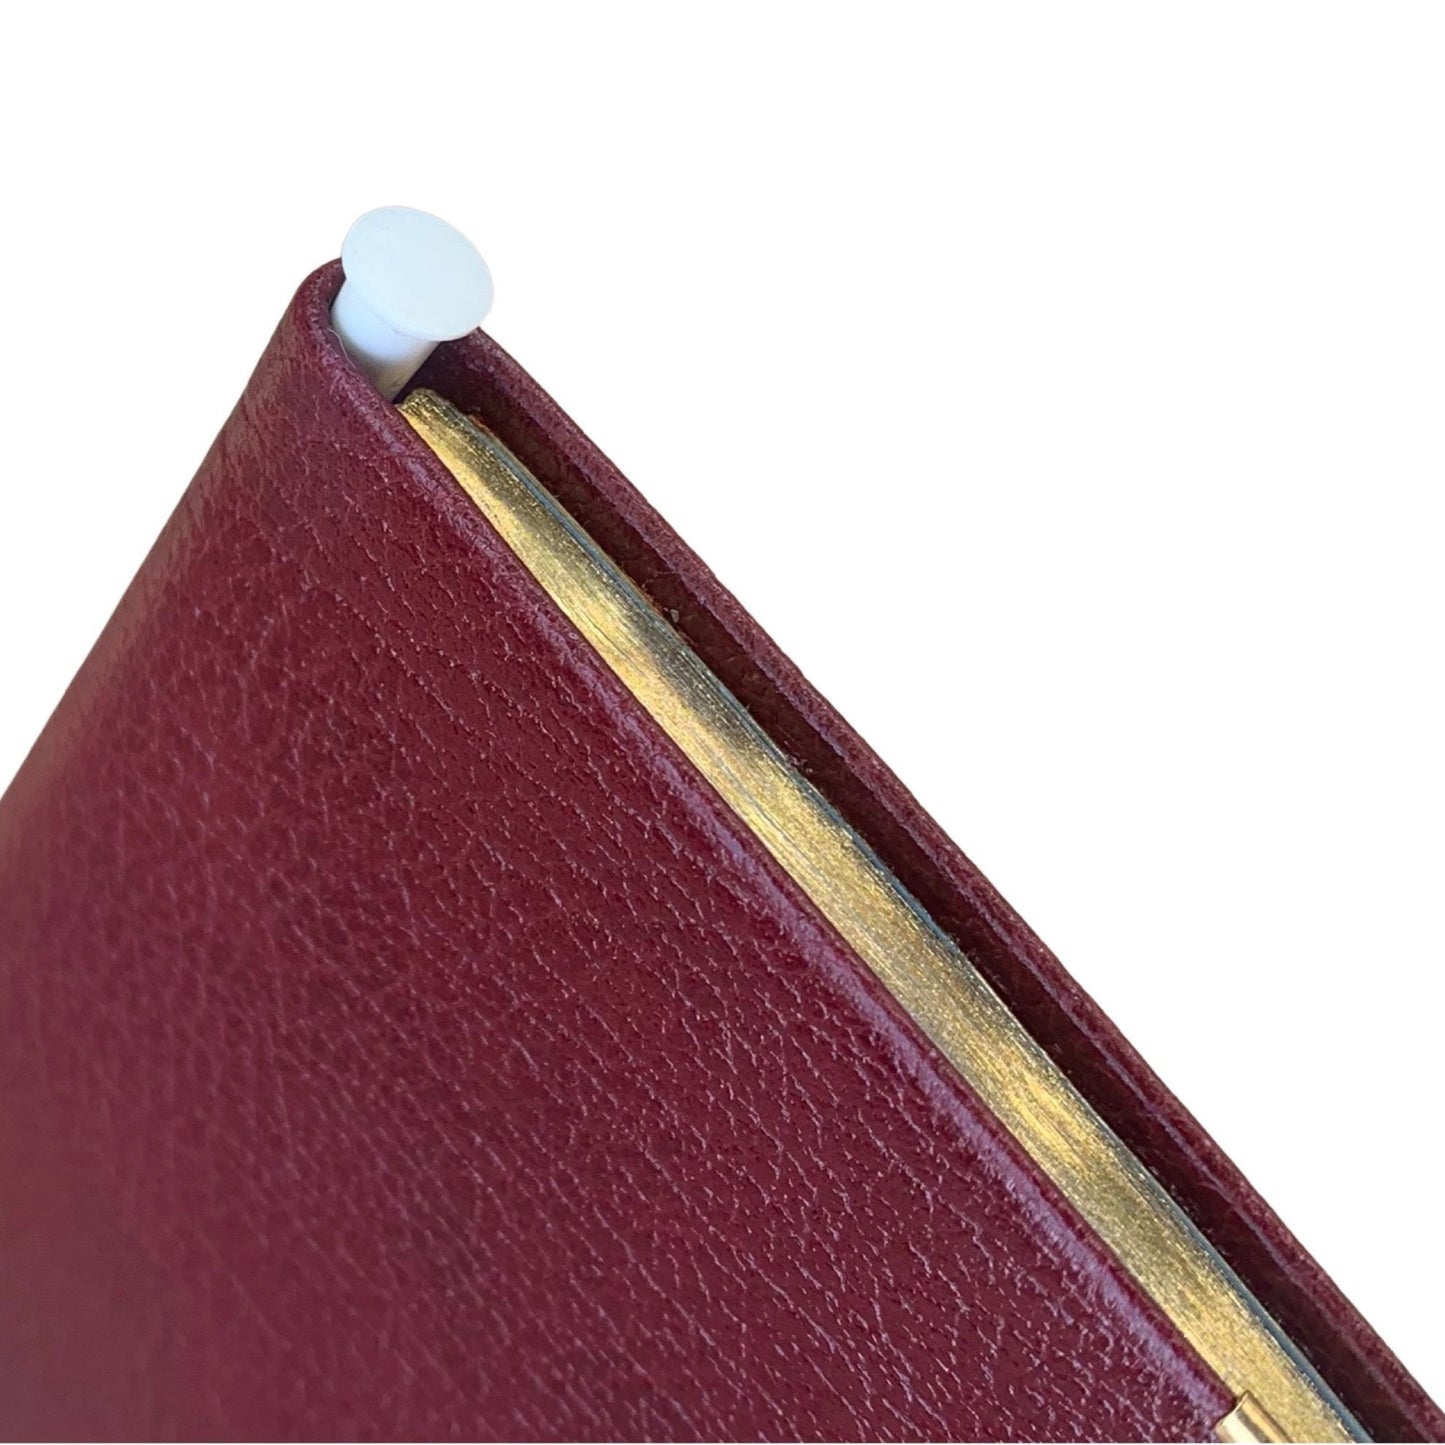 Address Book with Pencil, Gold Clasp, Gold Corners, Buffalo Embossed Calf Leather 4 by 2.5 Inch